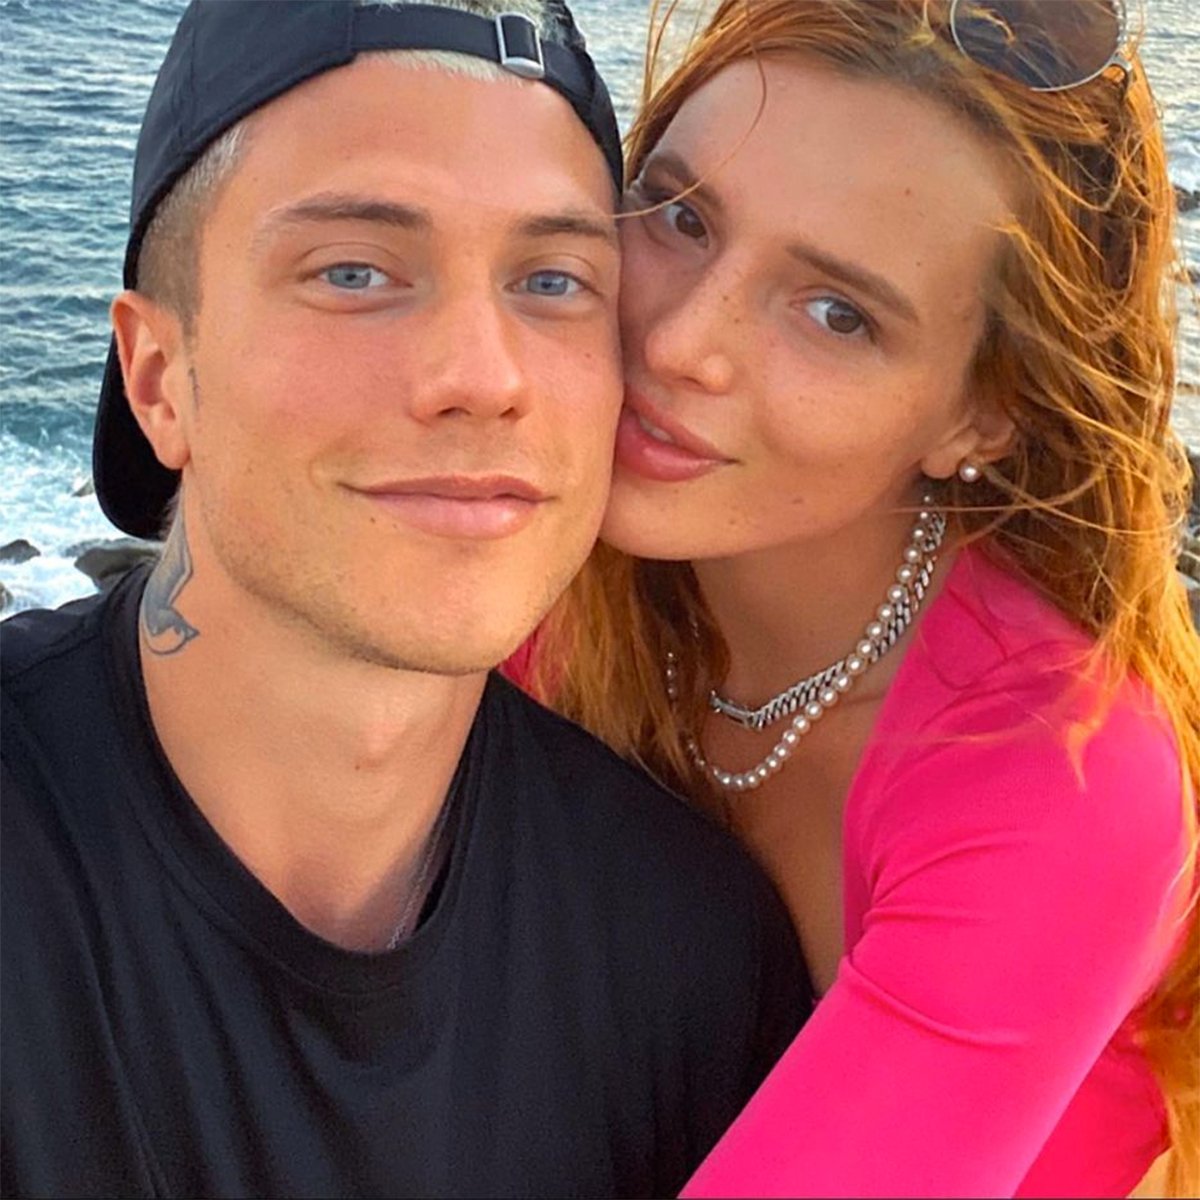 Bella Thorne is engaged to singer Benjamin Mascolo